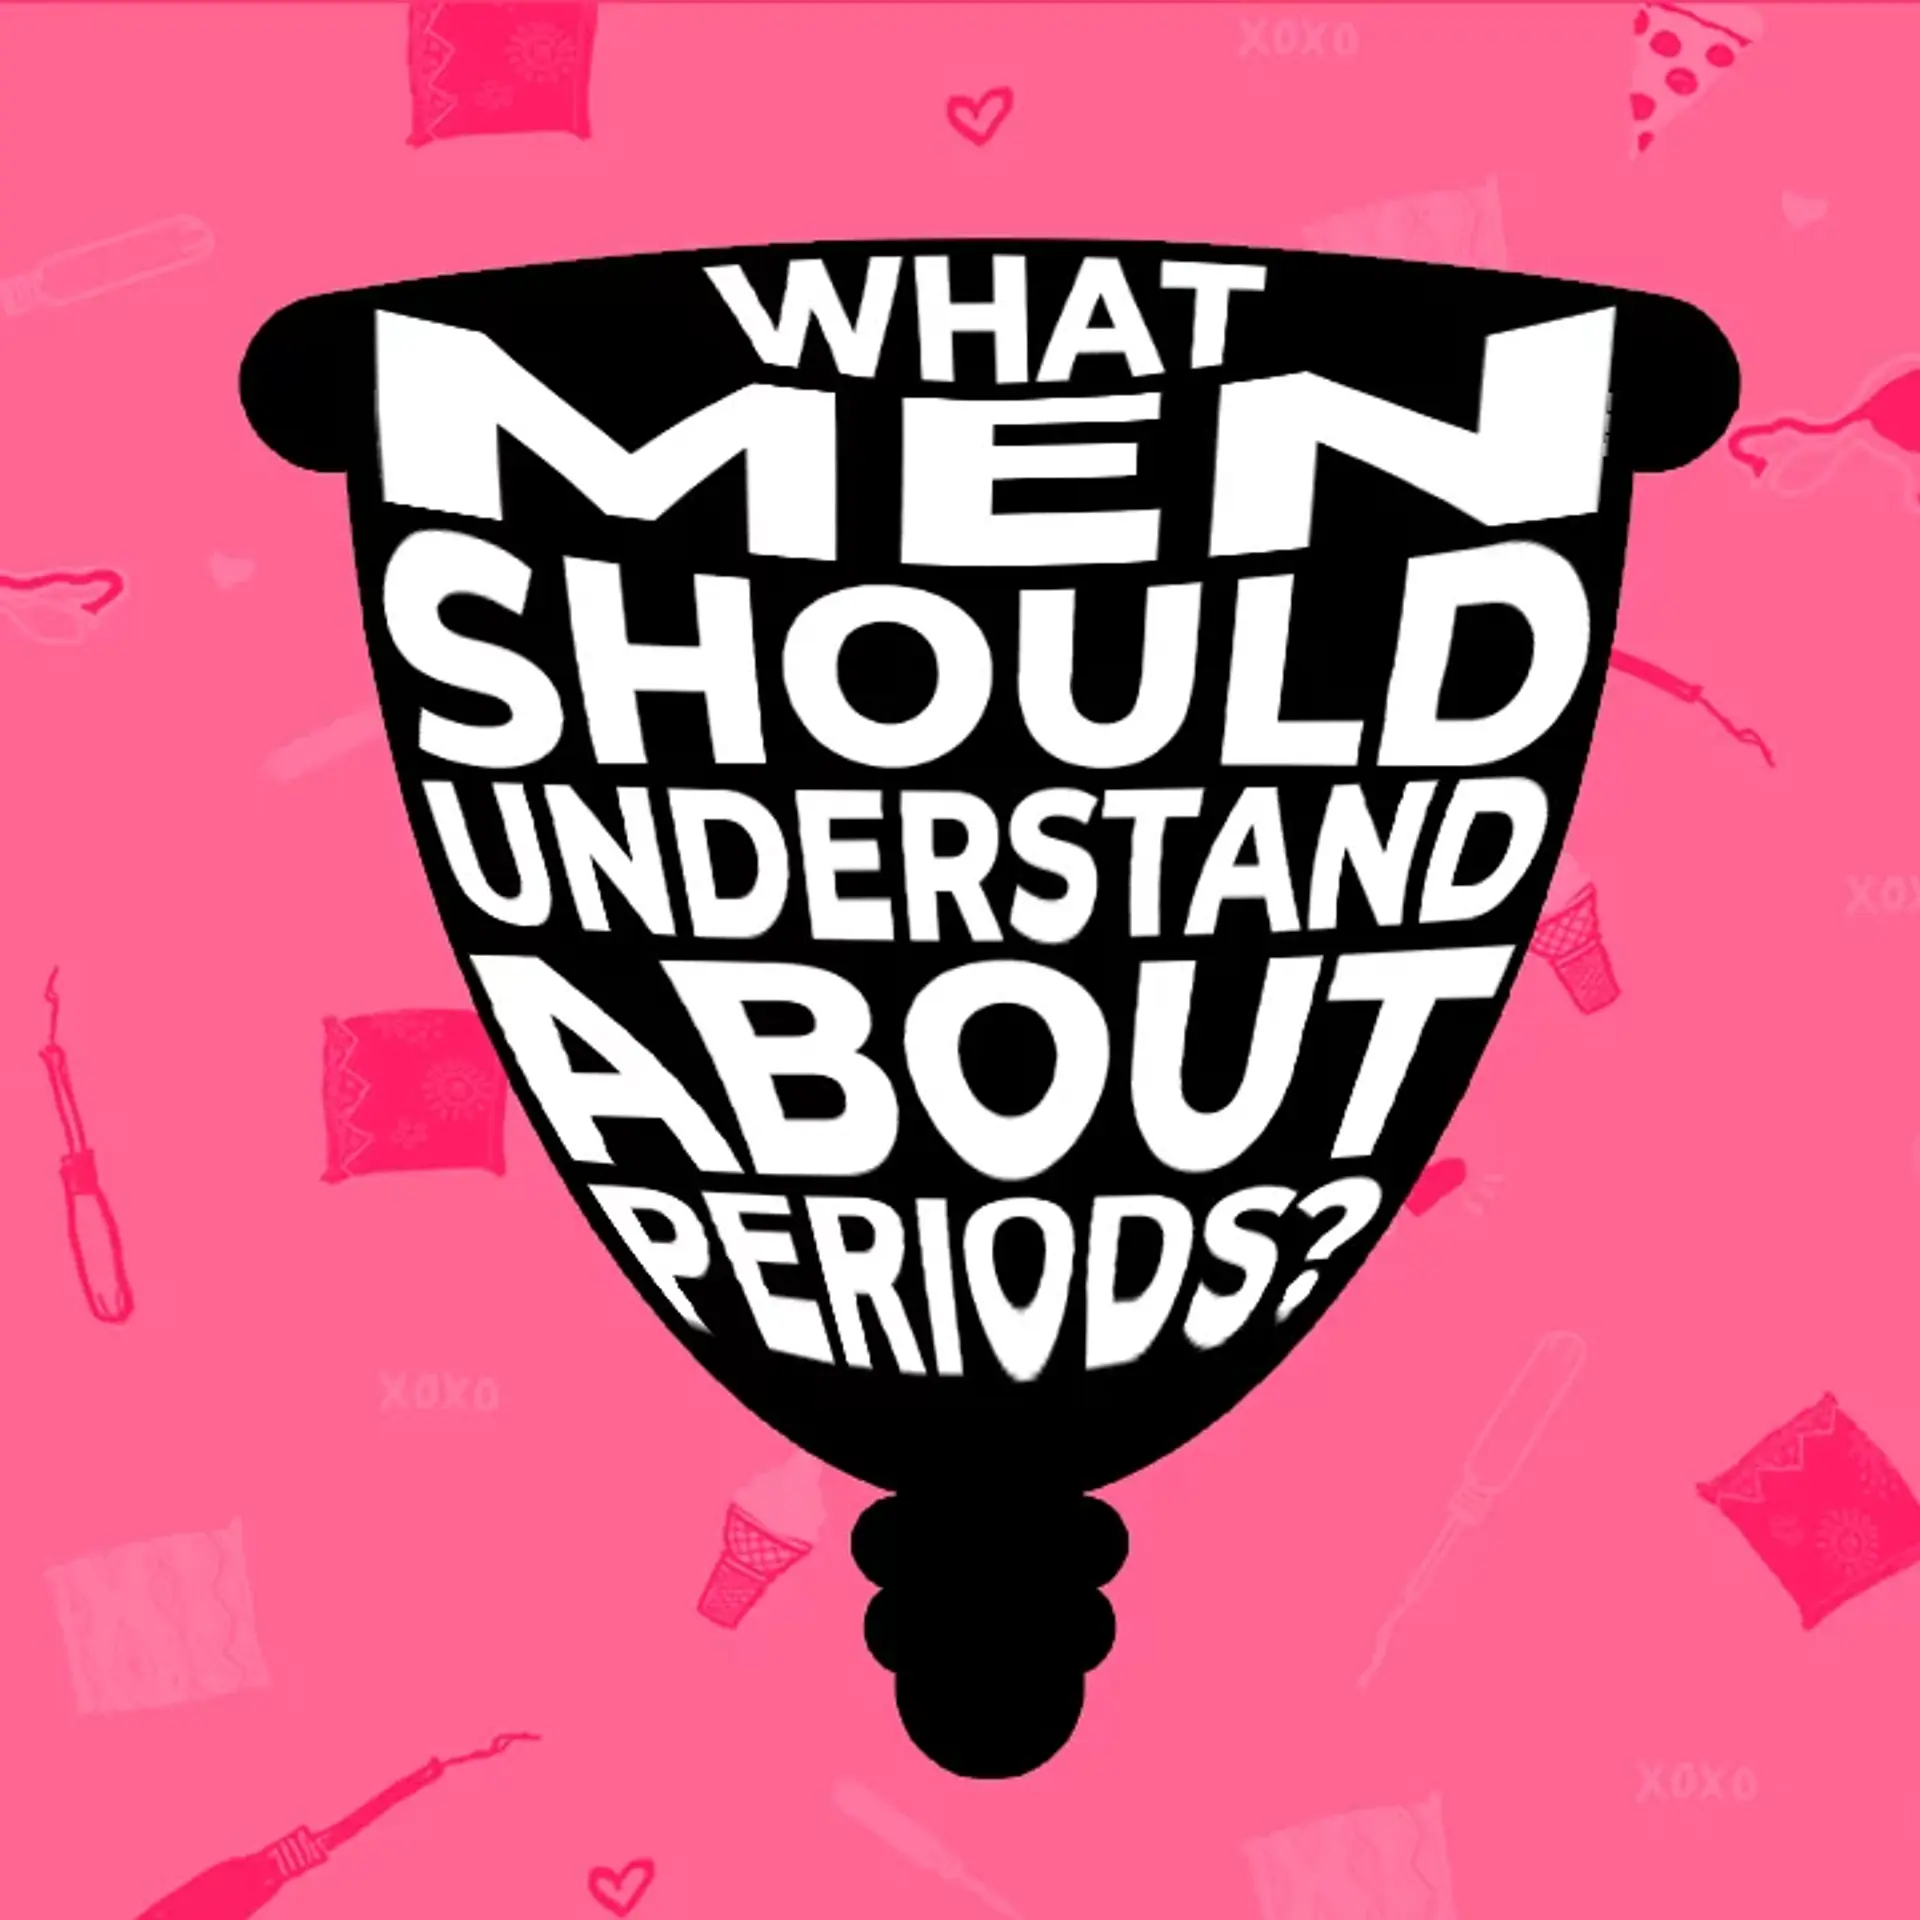 4 - Pregnancy During Periods and Various Sanitary Pads